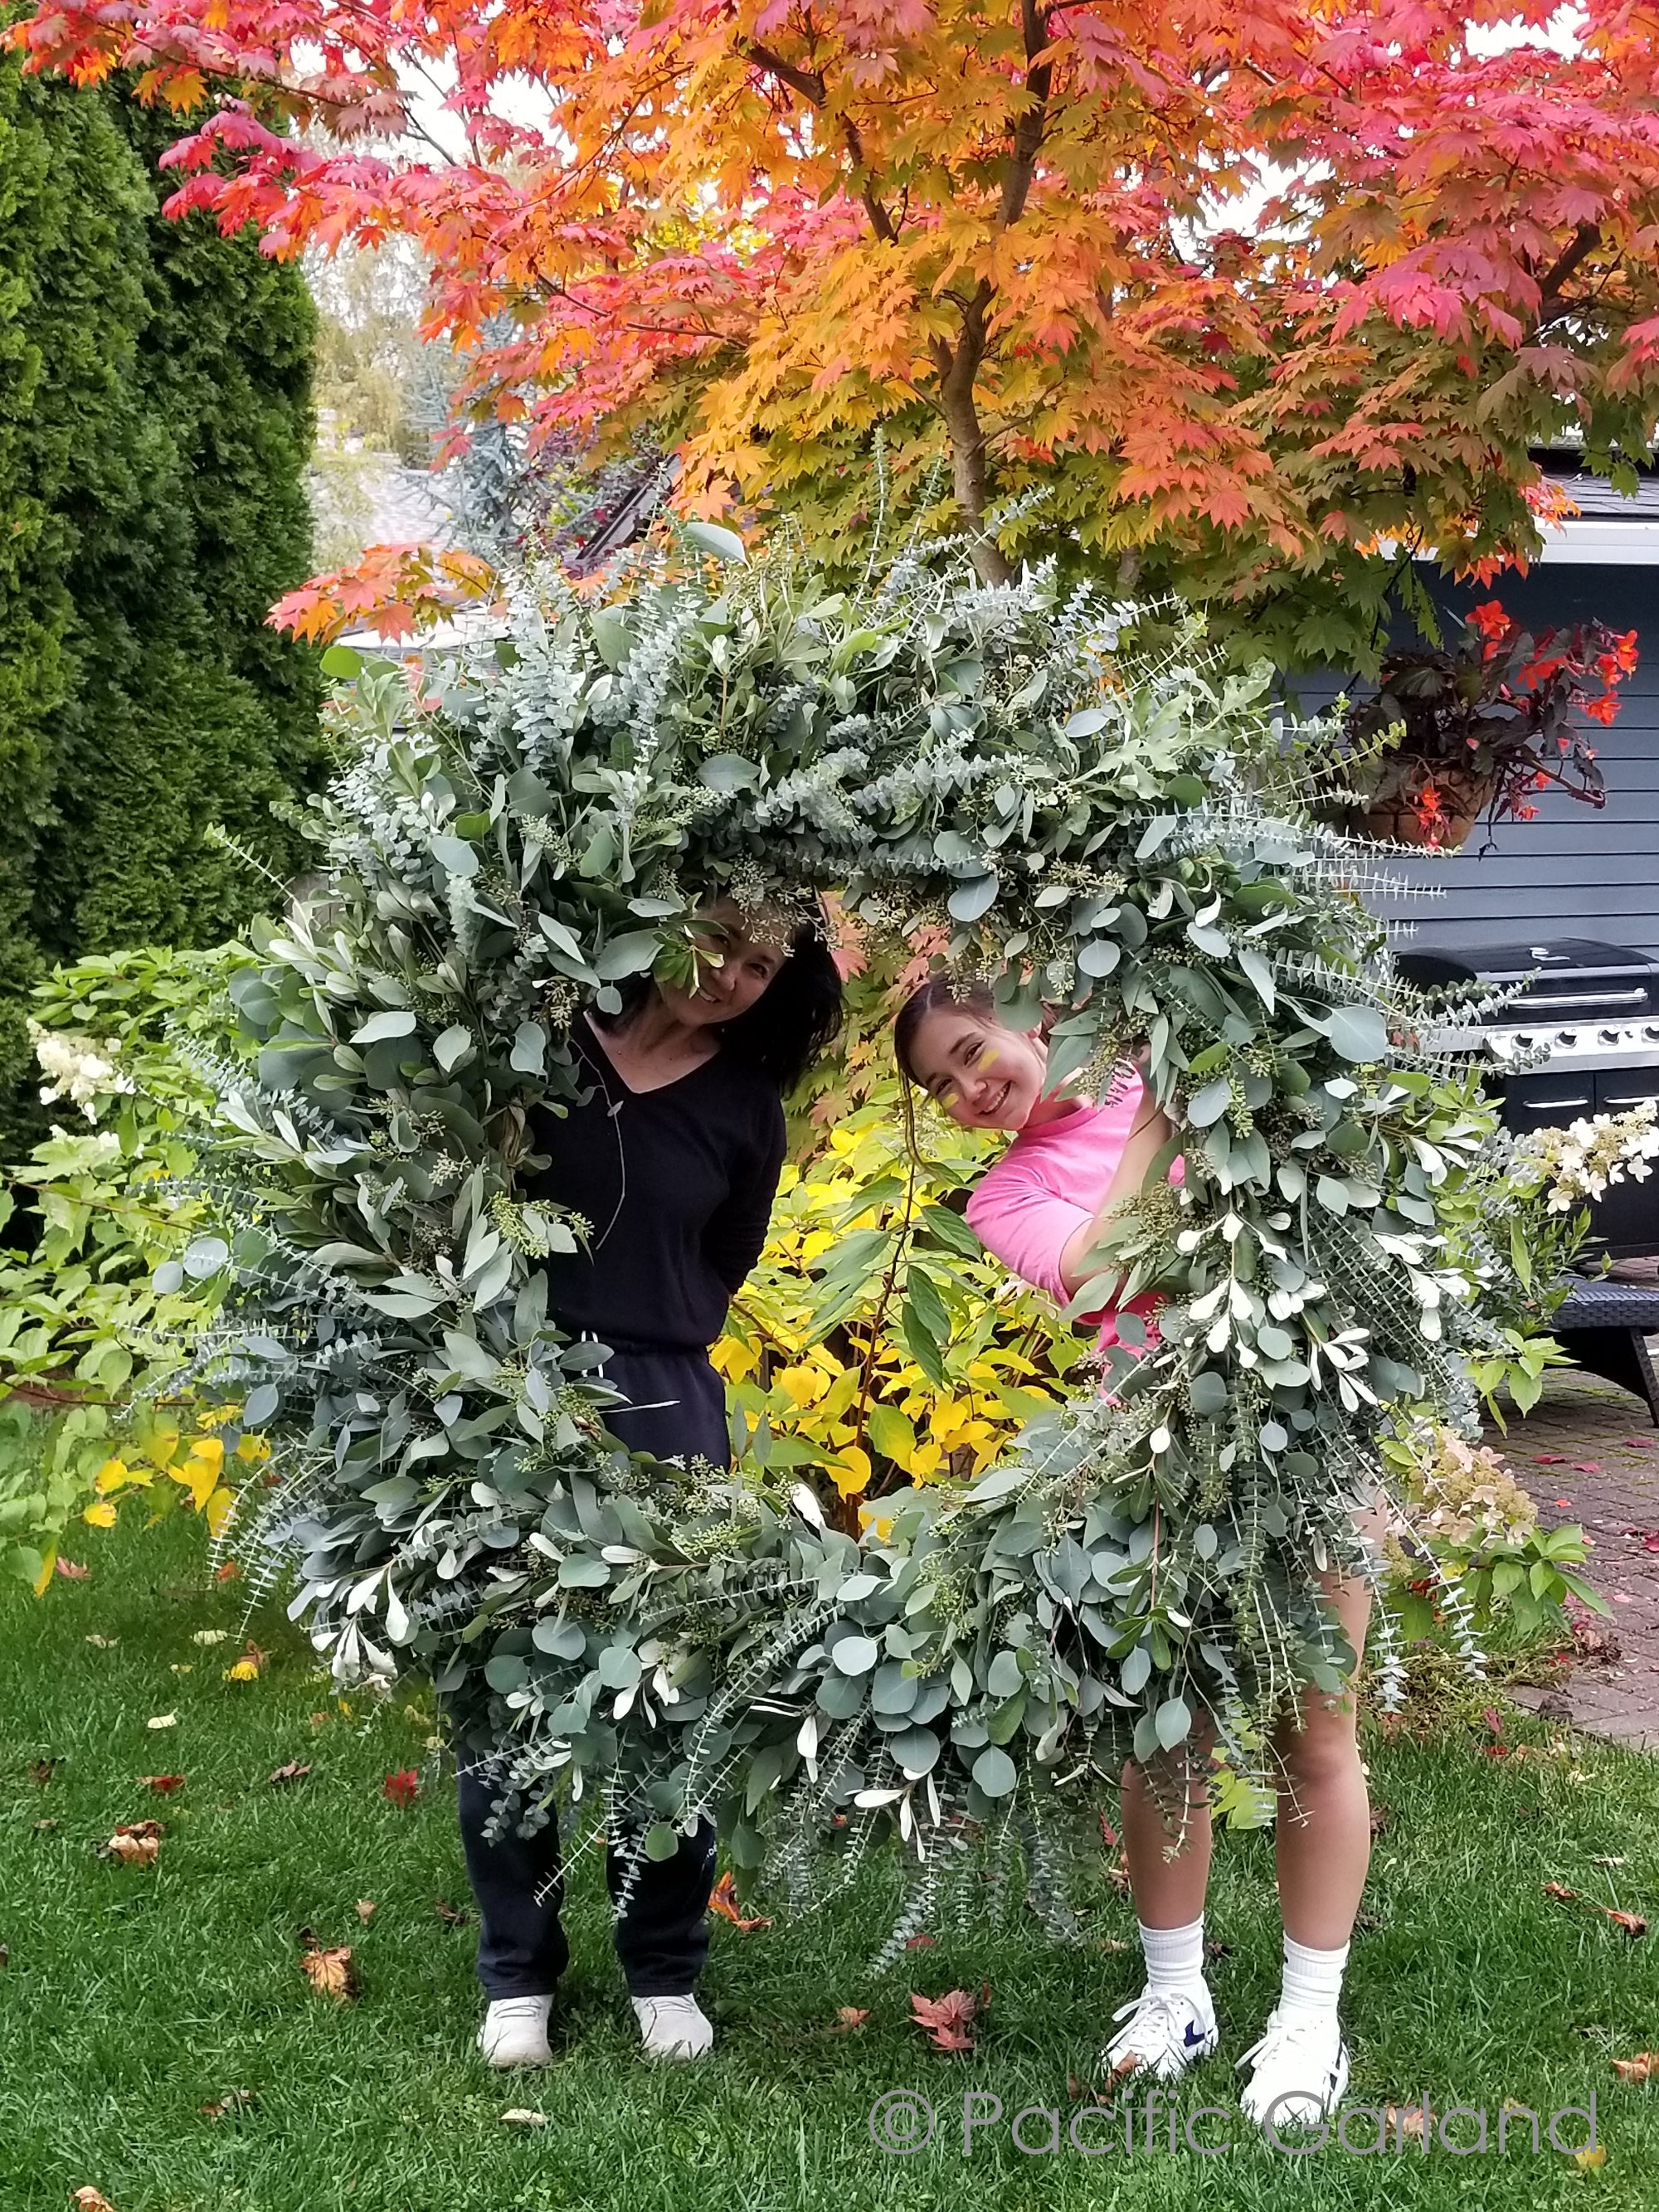 Moon Gate garland used on a floral hoop